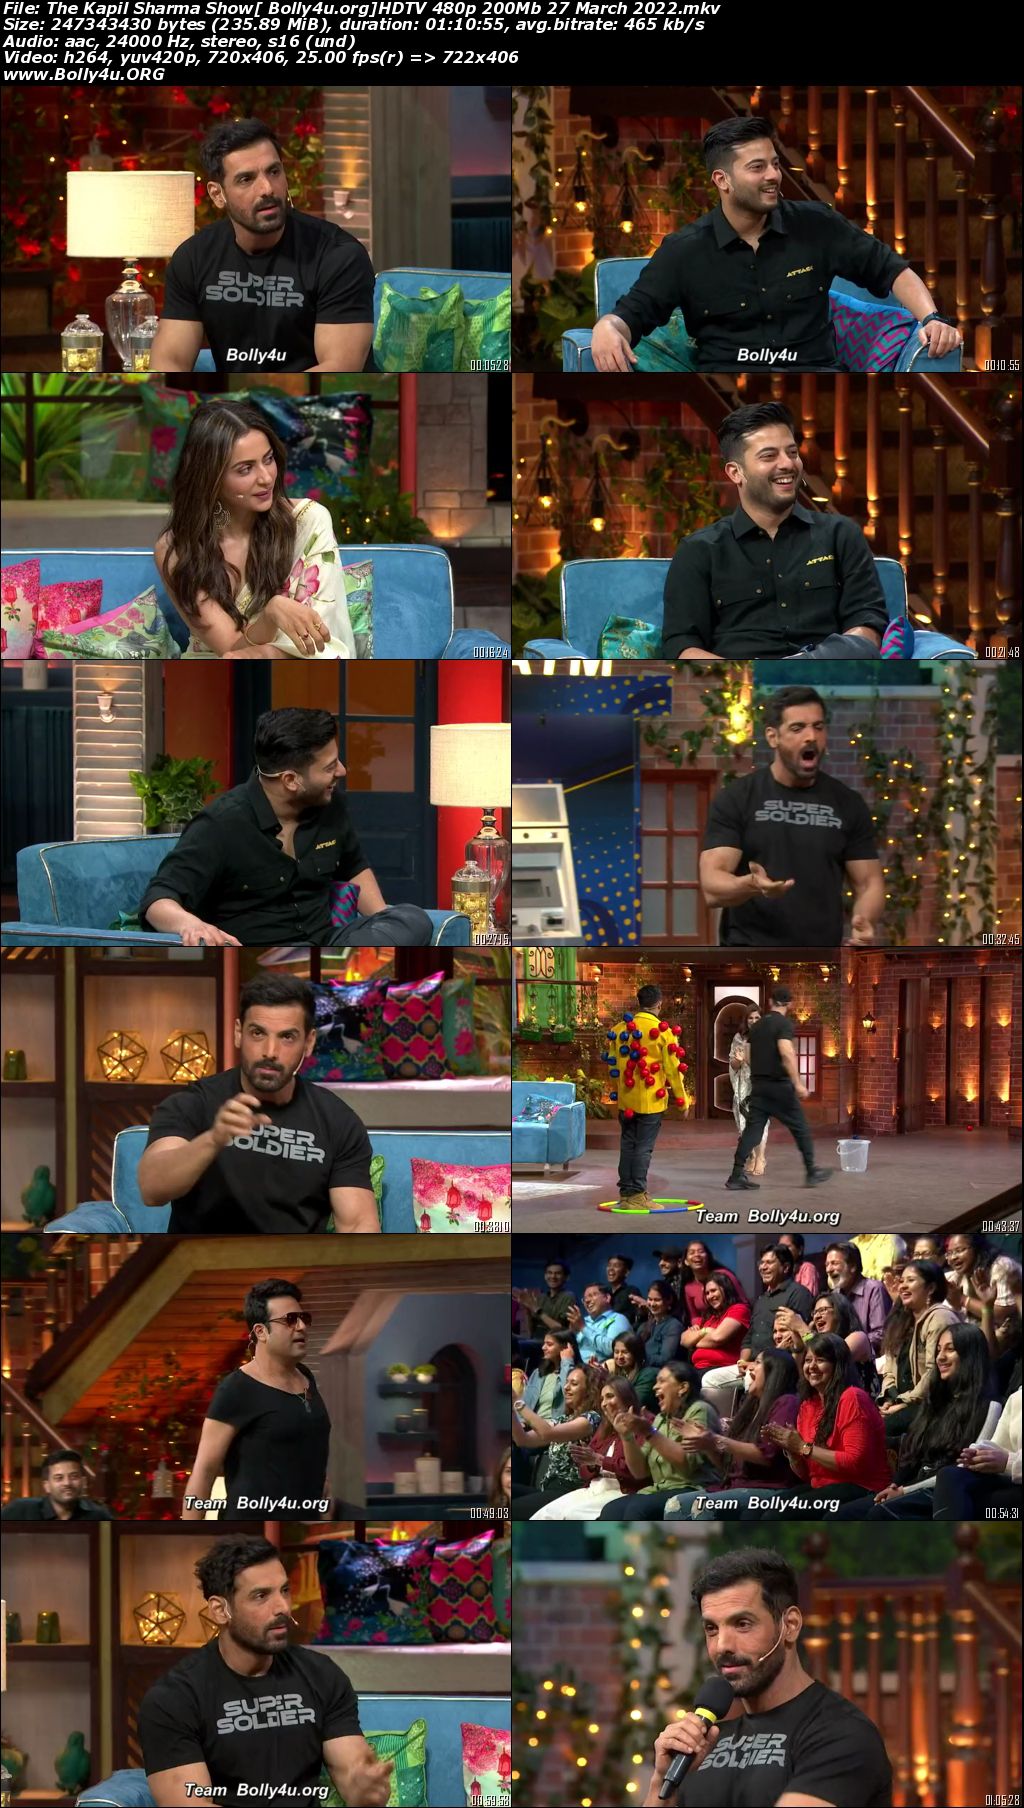 The Kapil Sharma Show HDTV 480p 200Mb 27 March 2022 Download